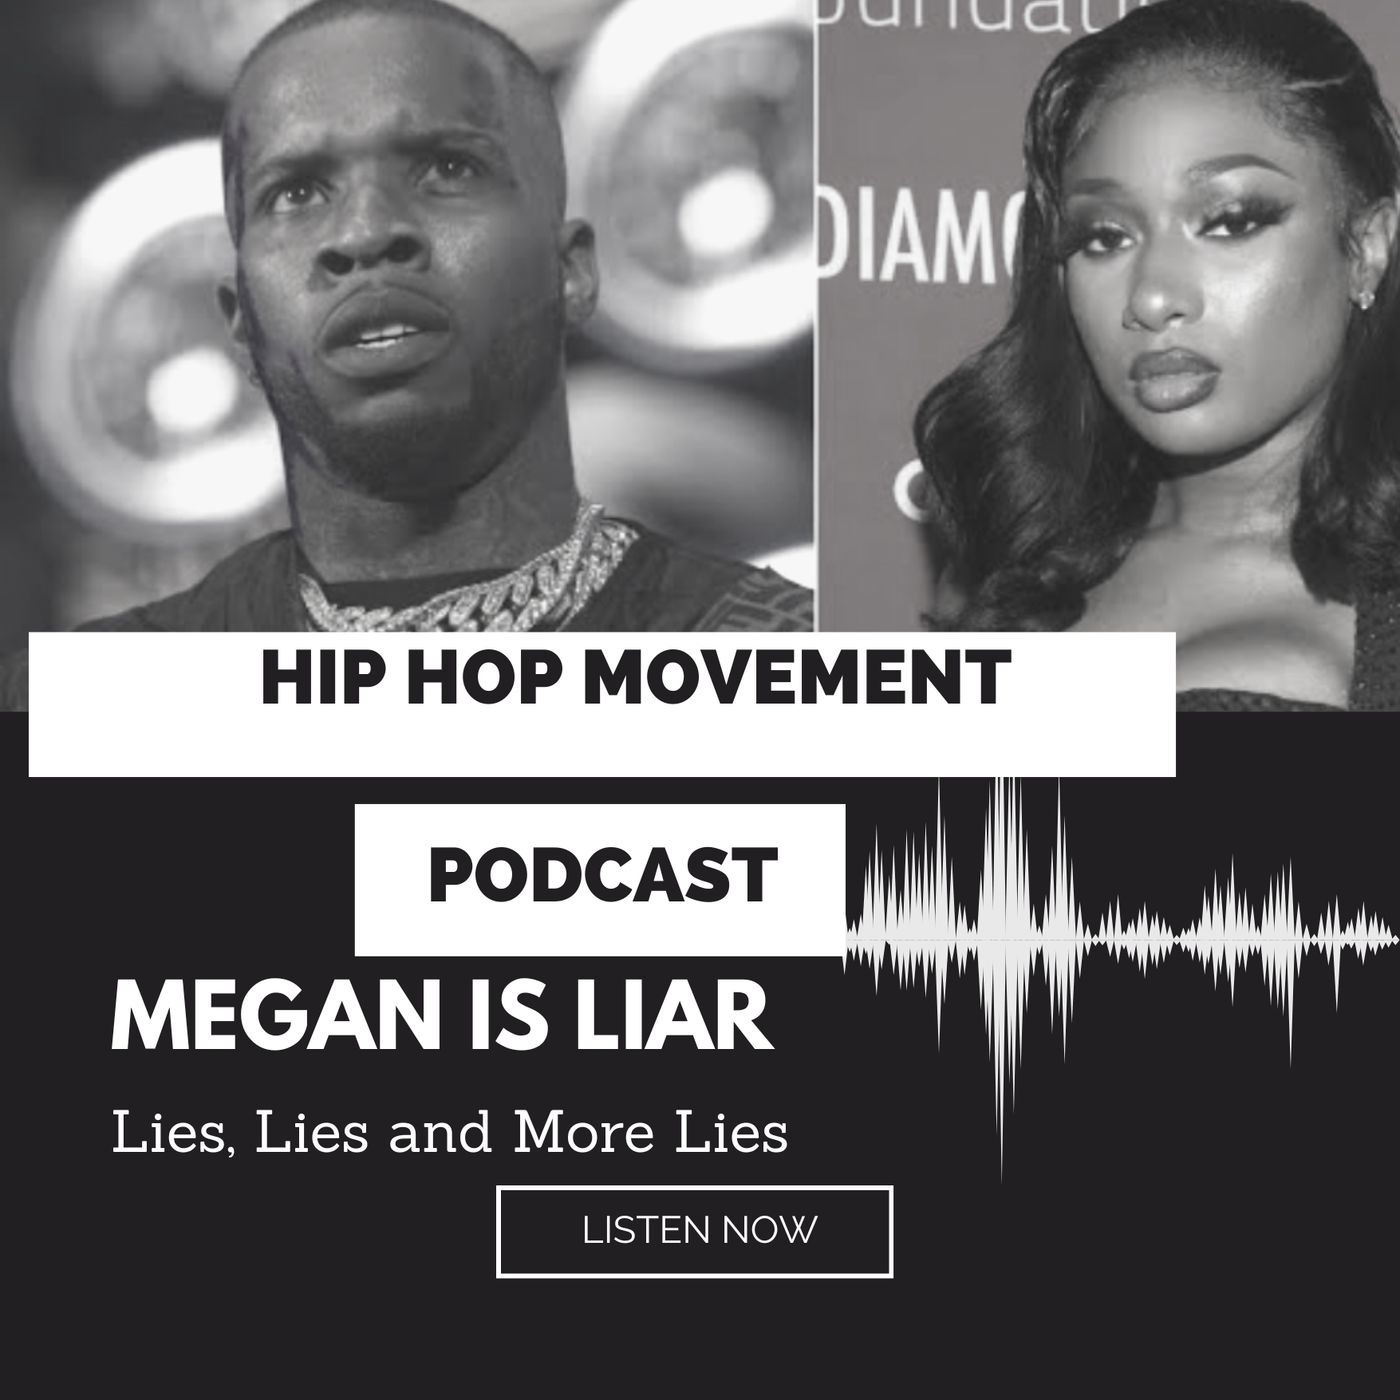 What I Really Think About Megan Thee Stallion  For Trying To Set Tory Lanez Up - Episode 86 -